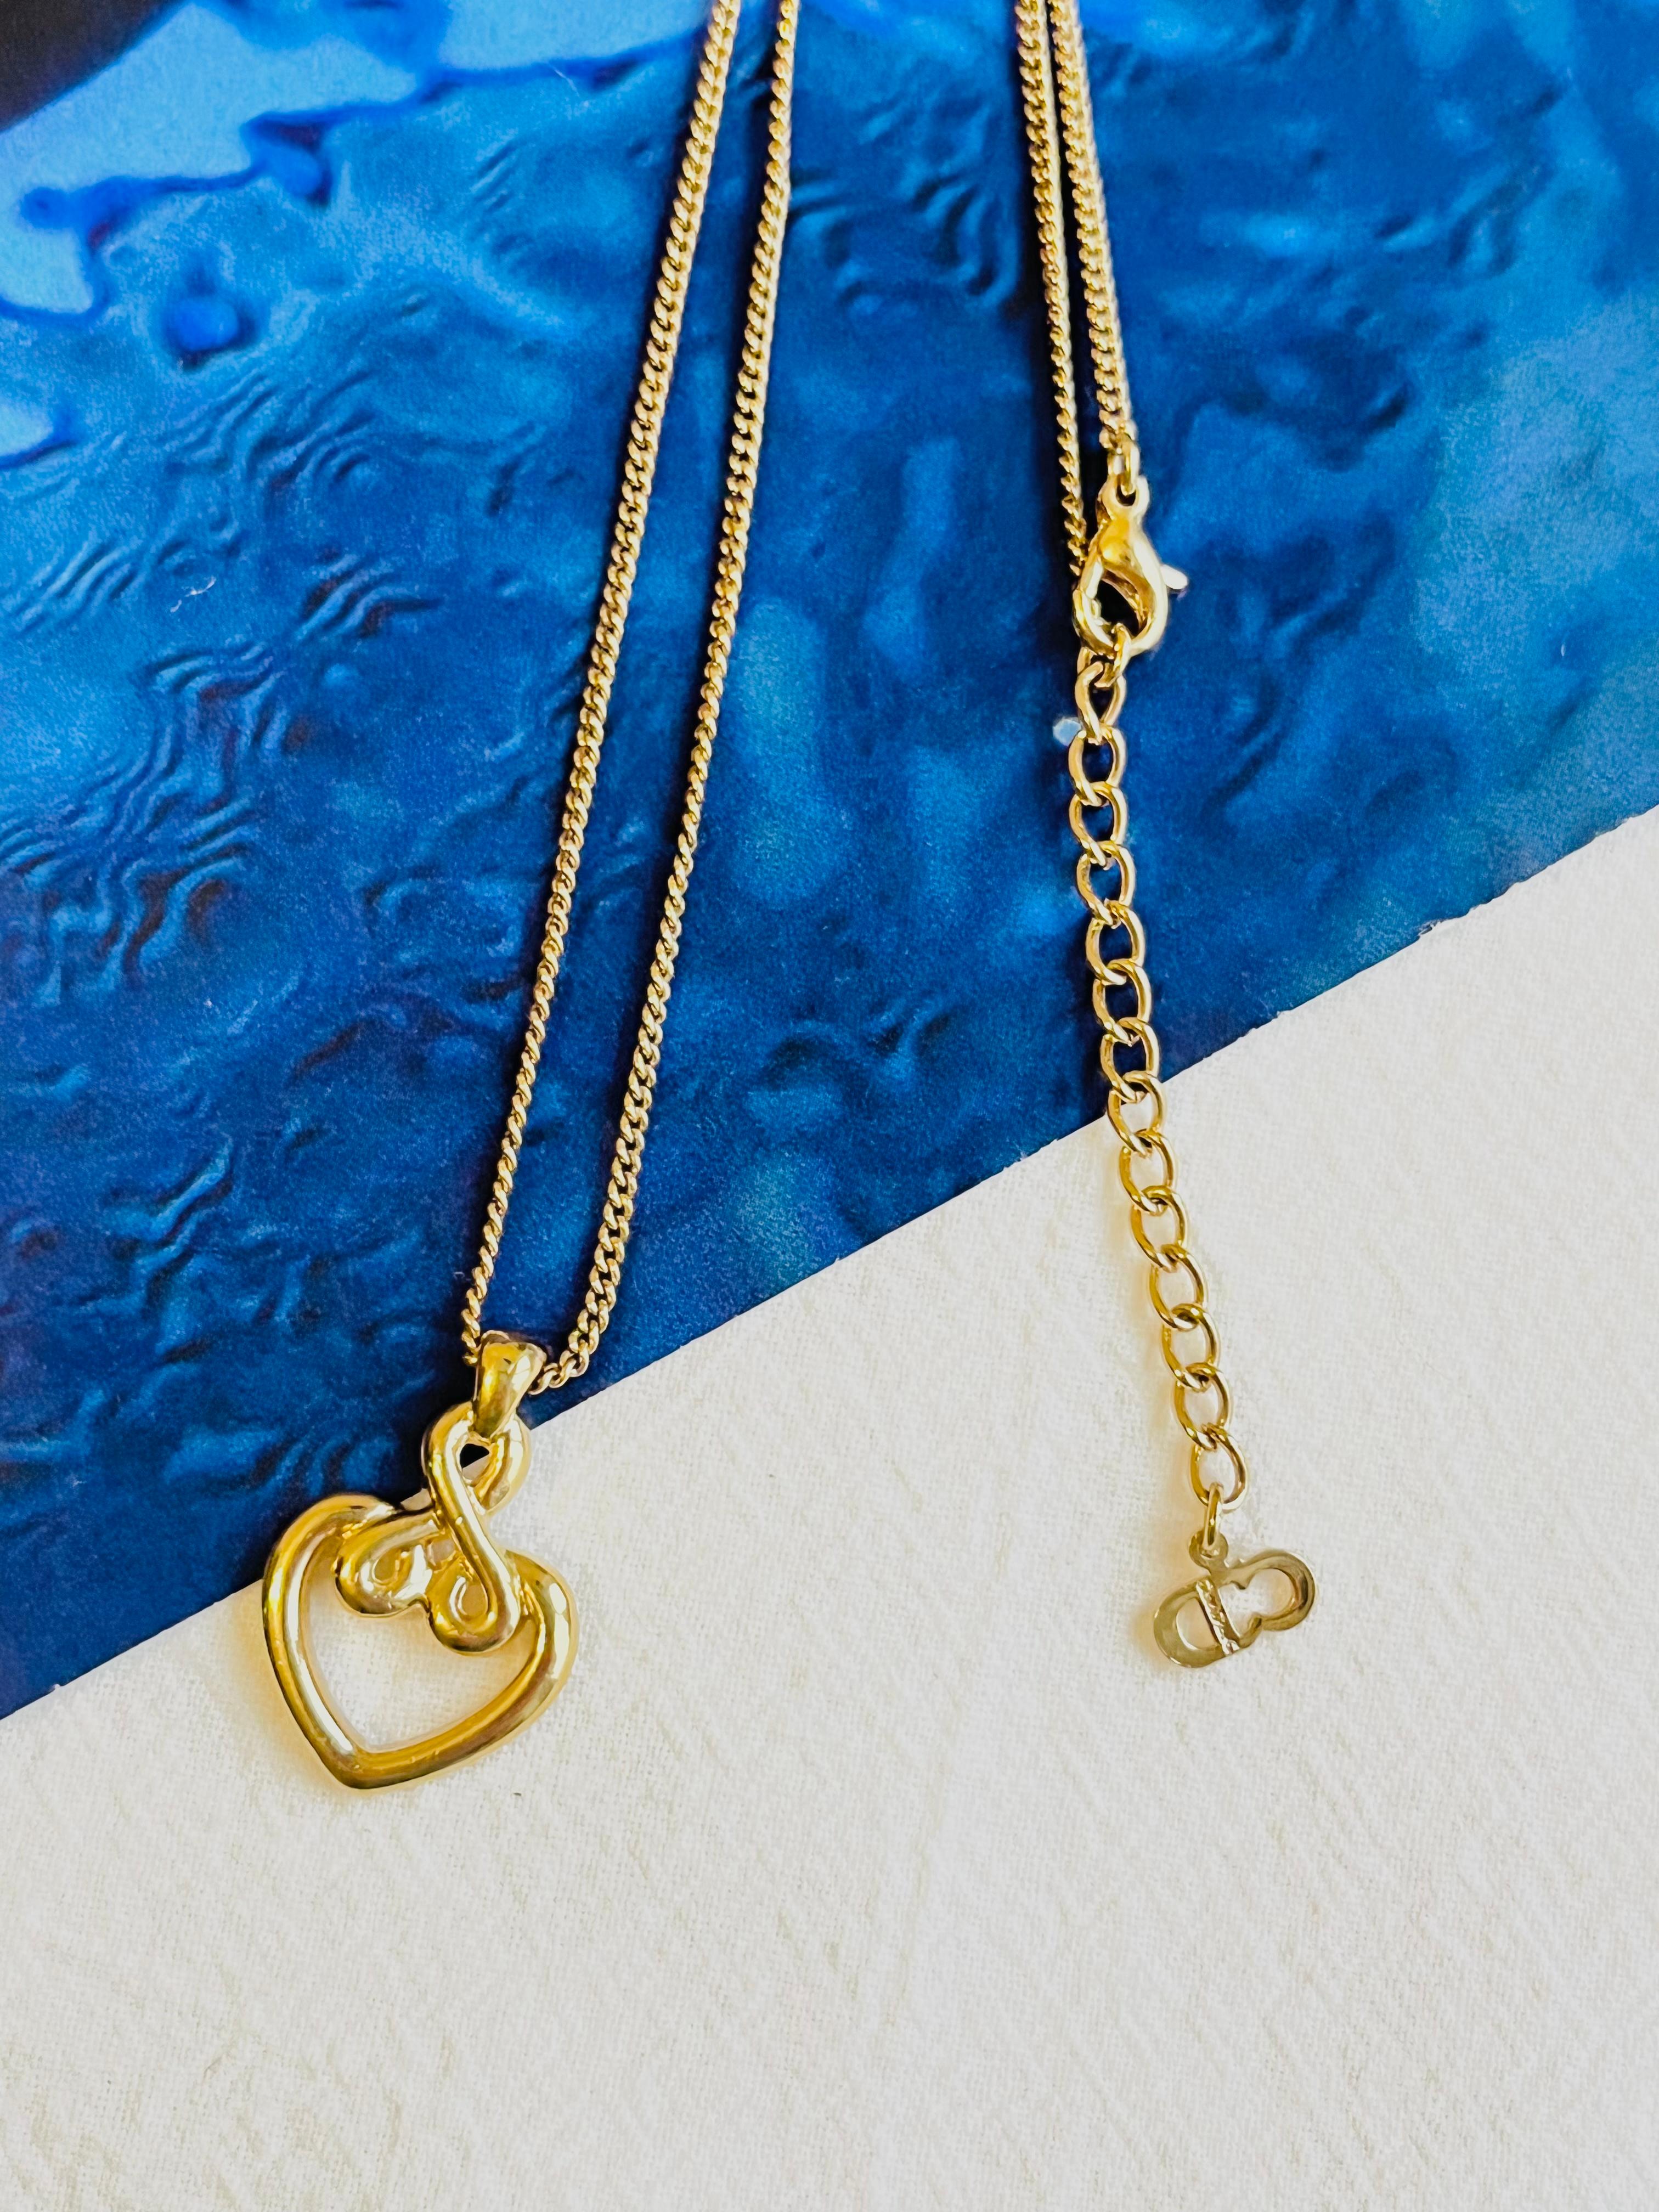 Christian Dior Vintage 1990s Baroque Heart Love Knot Openwork Pendant Necklace In Excellent Condition For Sale In Wokingham, England